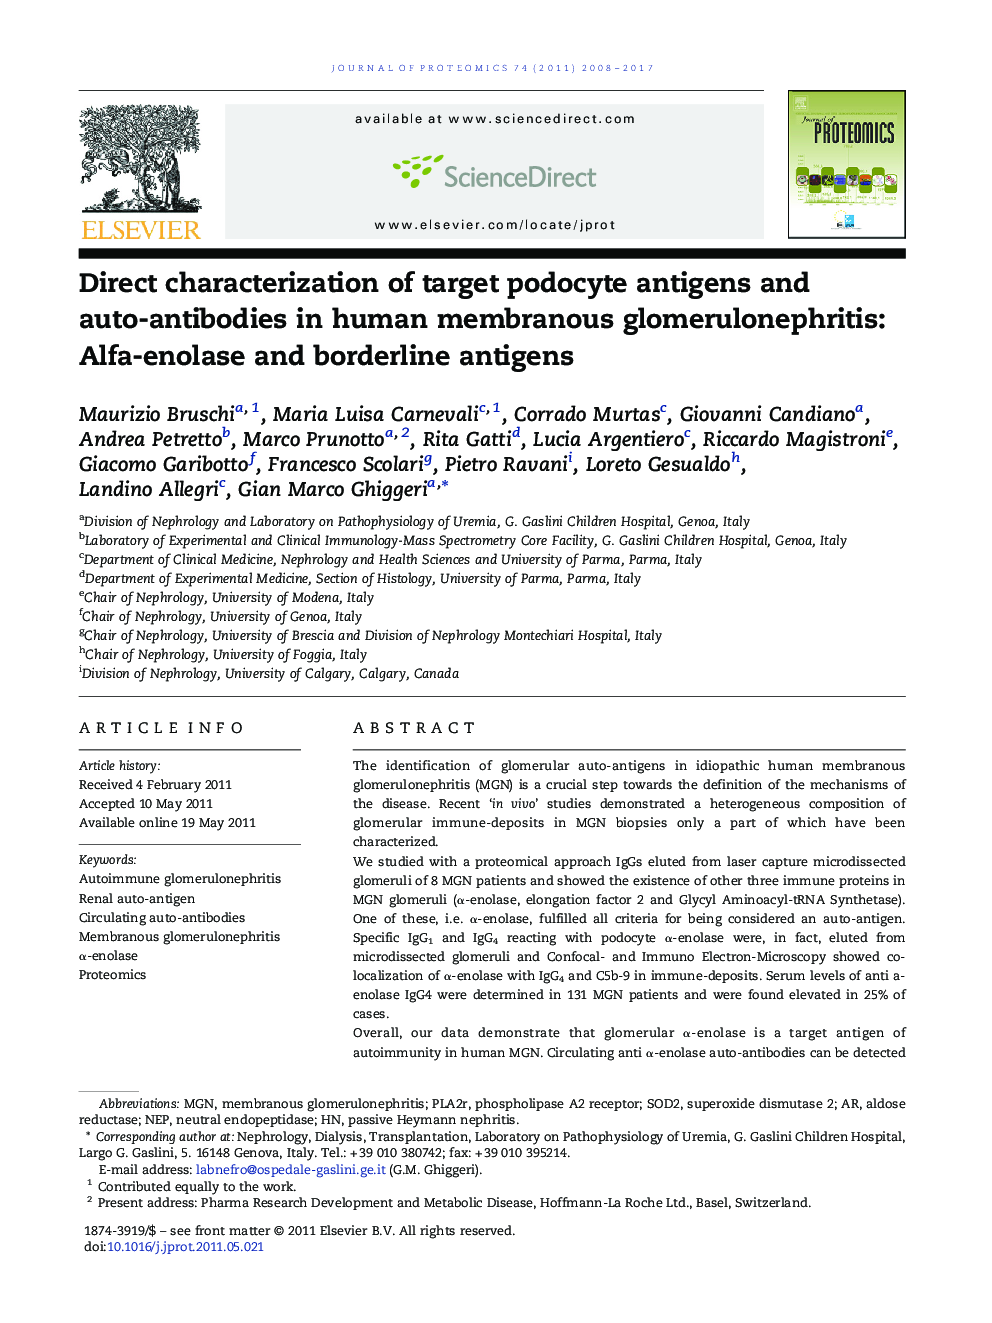 Direct characterization of target podocyte antigens and auto-antibodies in human membranous glomerulonephritis: Alfa-enolase and borderline antigens